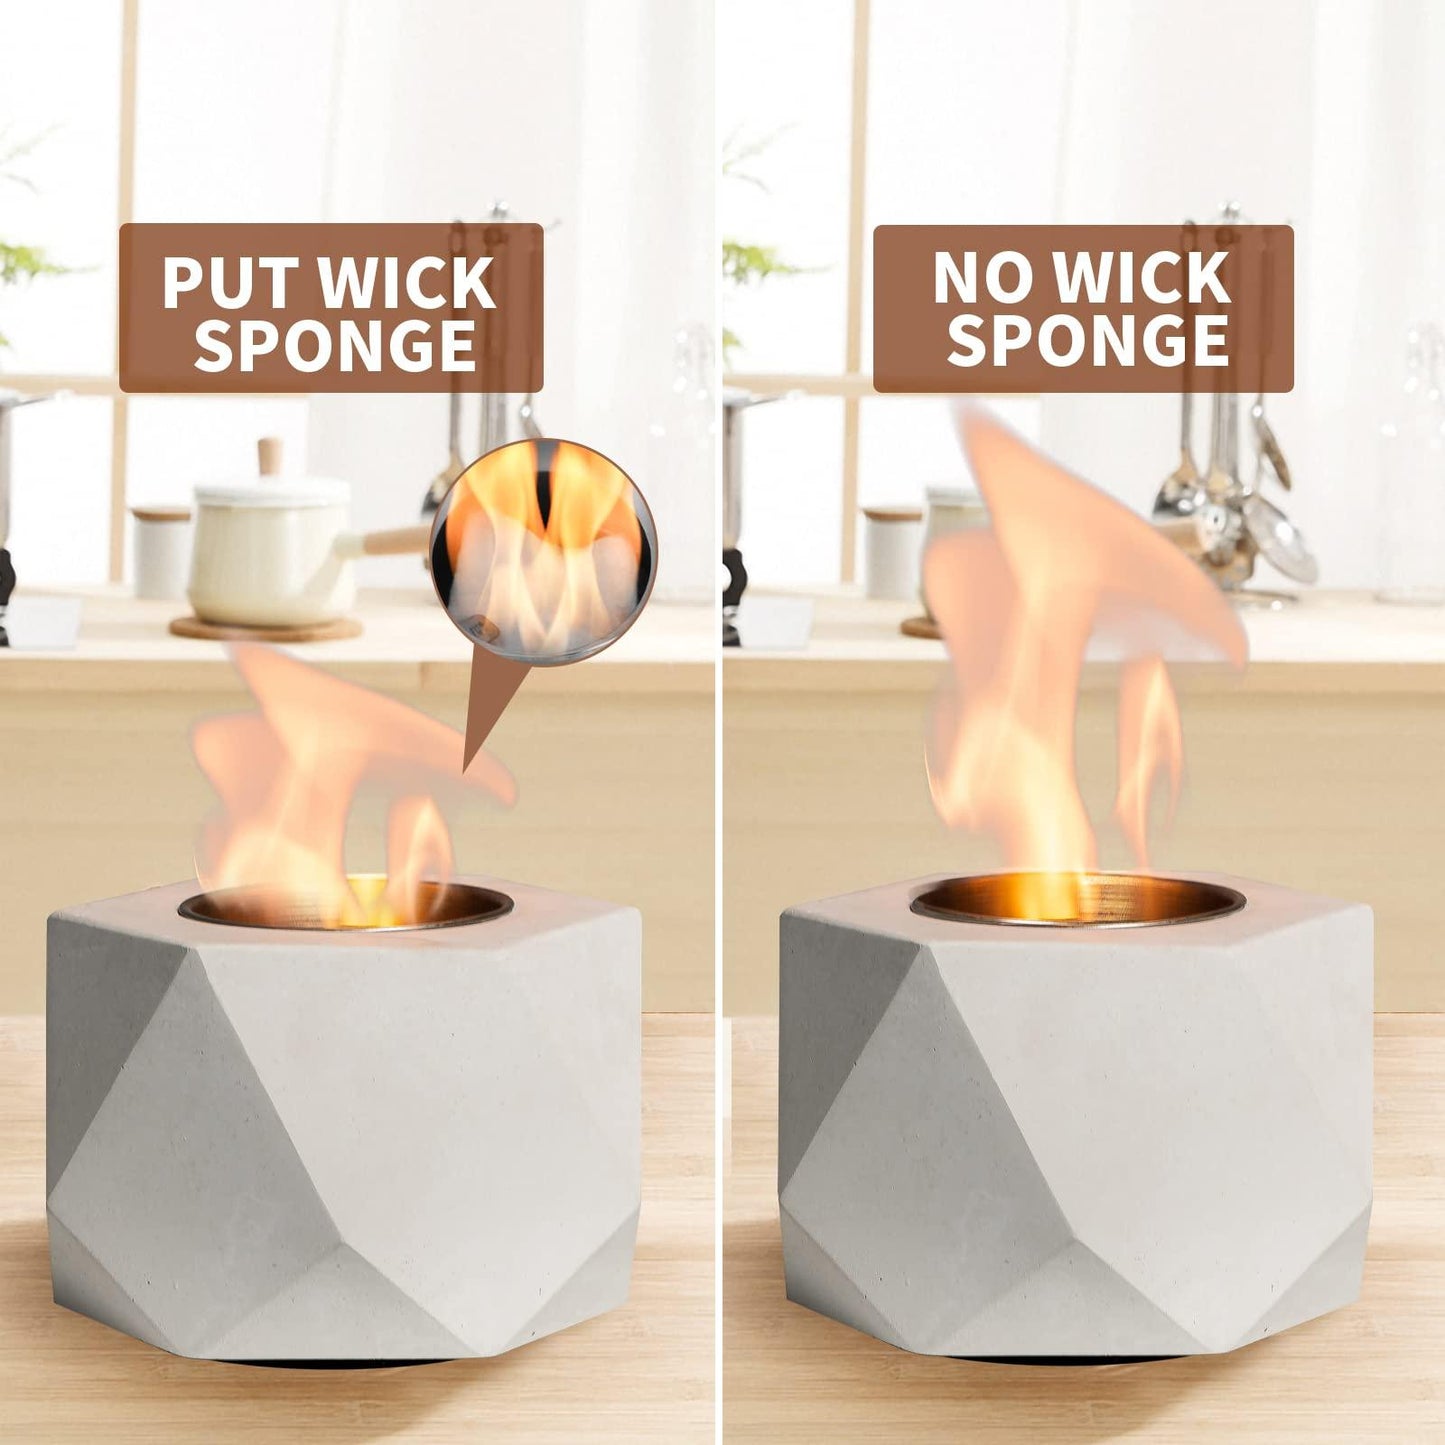 KIZZBY Table Top Fire Pit Bowl - Concrete Tabletop Fireplace Indoor Outdoor Decor Portable Rubbing Alcohol Burner Smores Maker for Patio Balcony with Extinguisher - CookCave